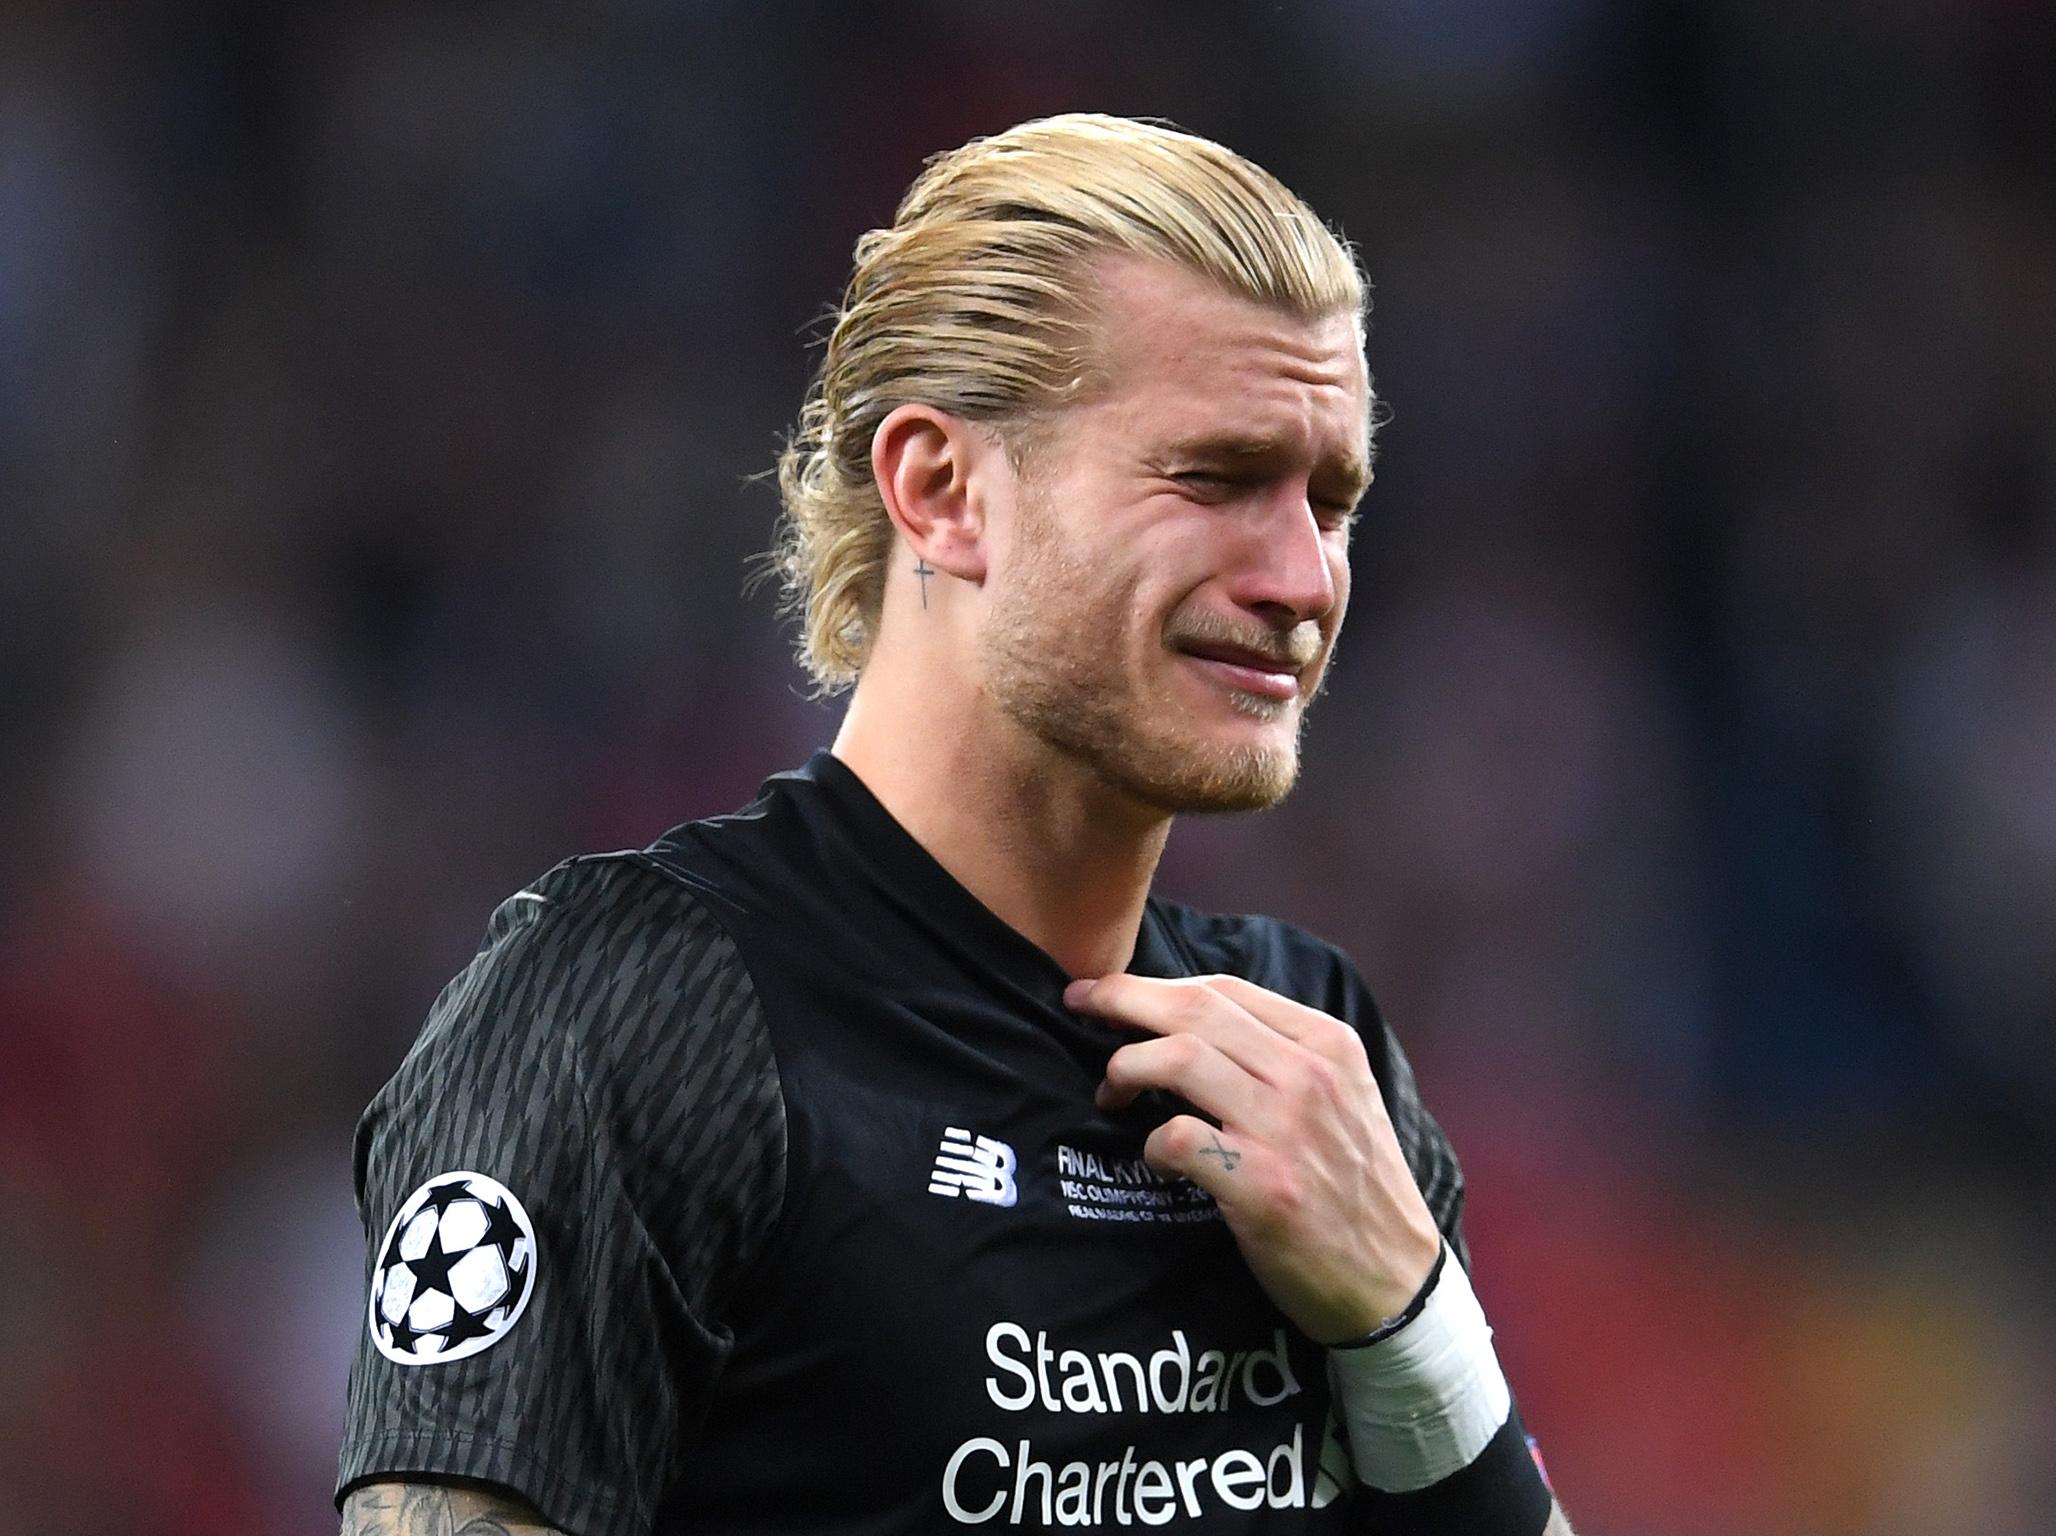 Karius was inconsolable after the Champions League final